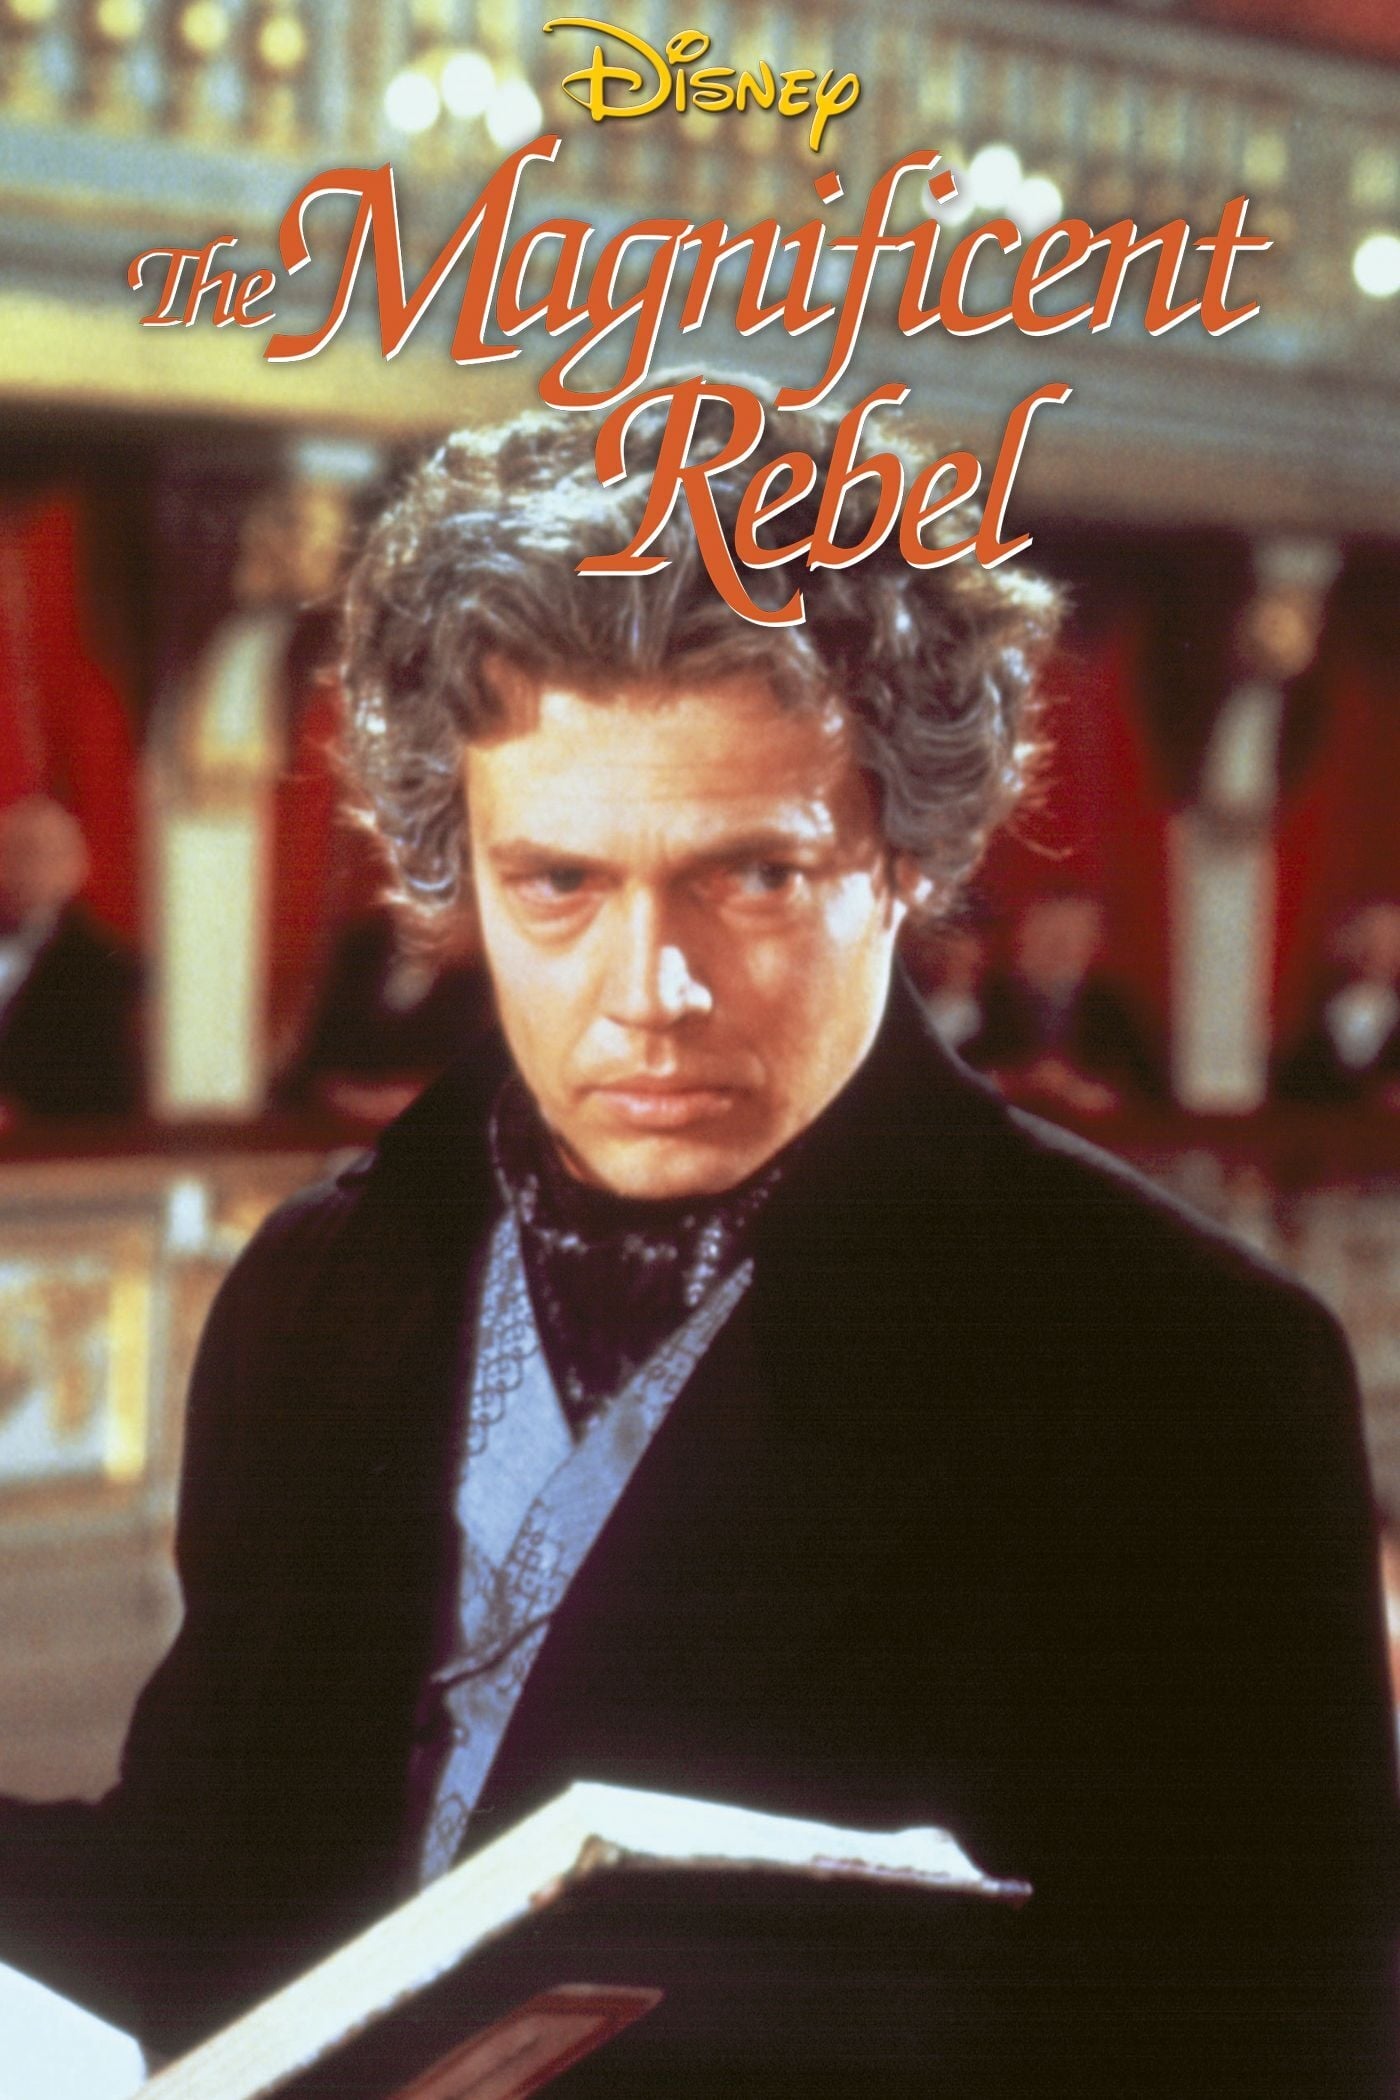 The Magnificent Rebel (1962)